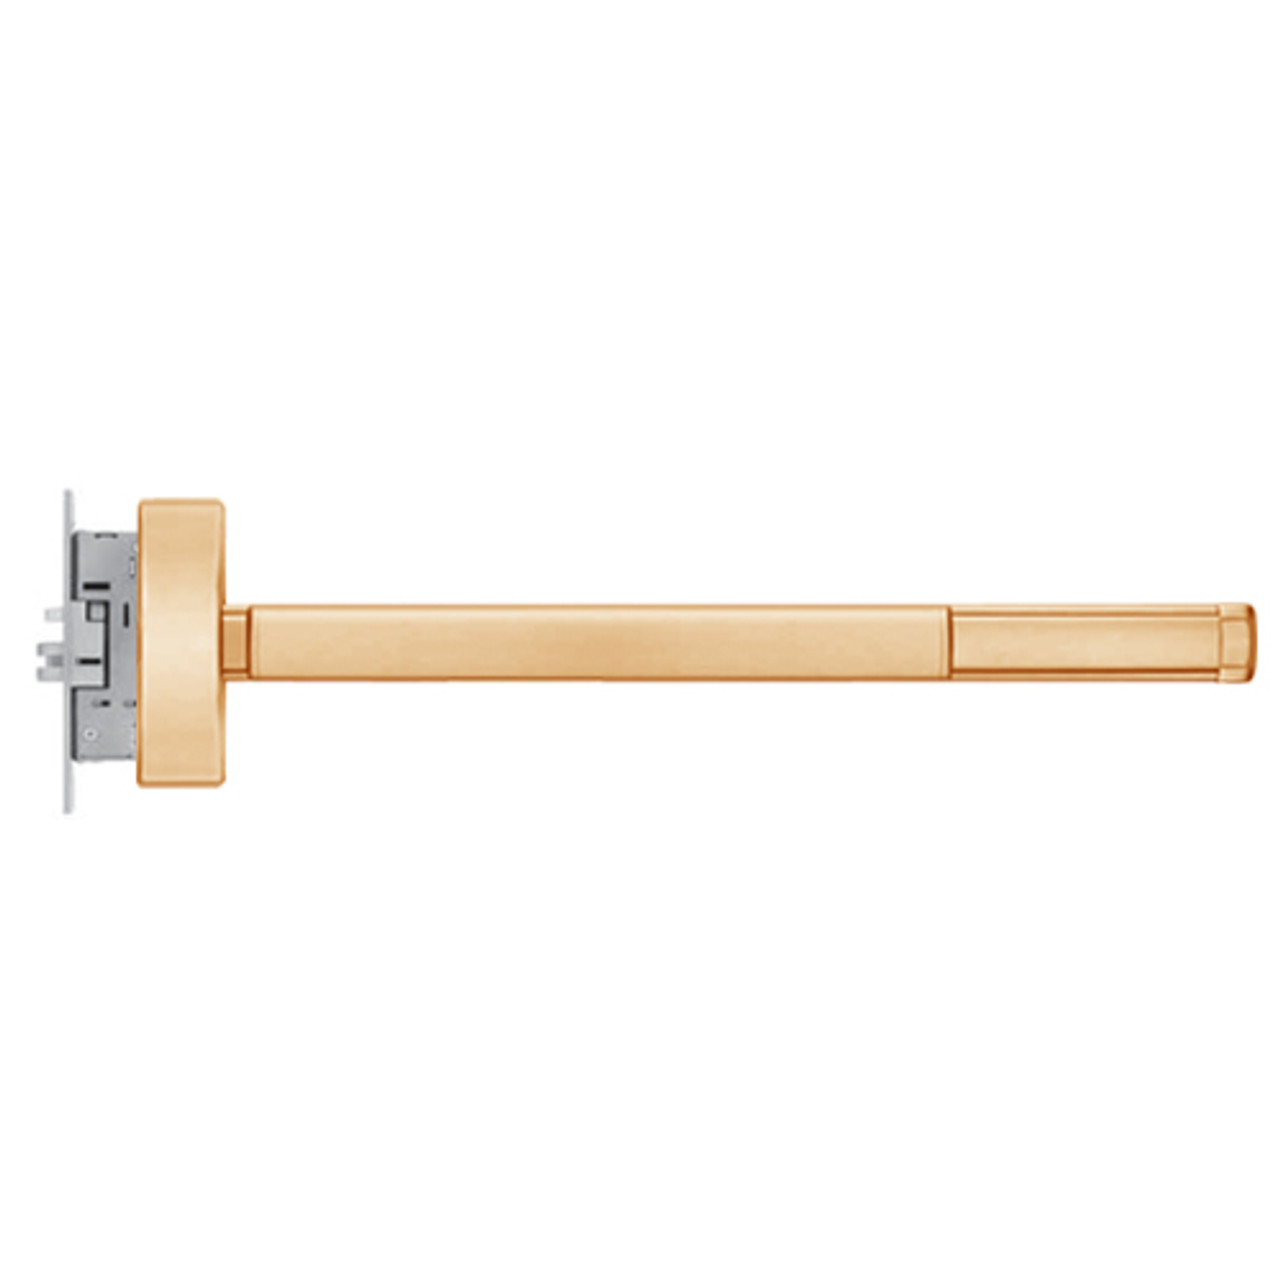 MLRFL2315-RHR-612-48 PHI 2300 Series Fire Rated Apex Mortise Exit Device with Motorized Latch Retraction Prepped for Thumb Piece Always Active in Satin Bronze Finish